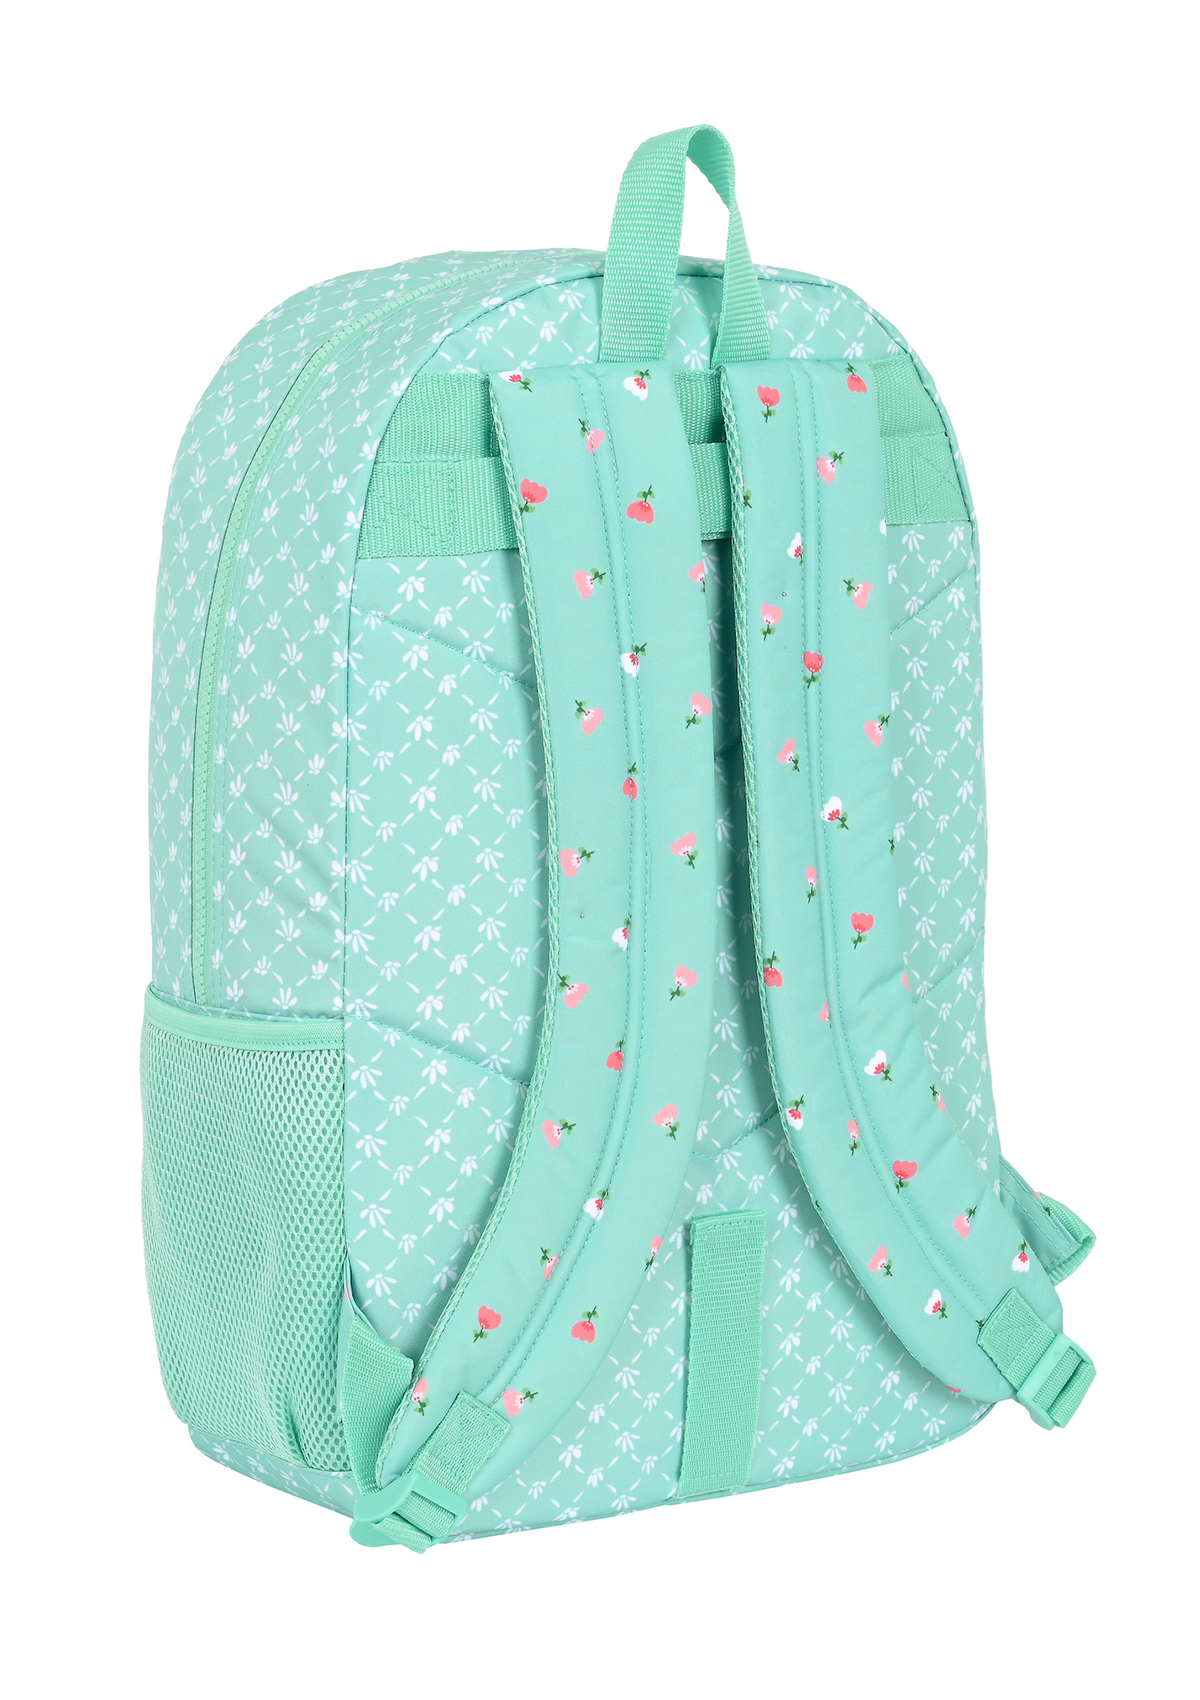 Glowlab Blooming Day Large Backpack